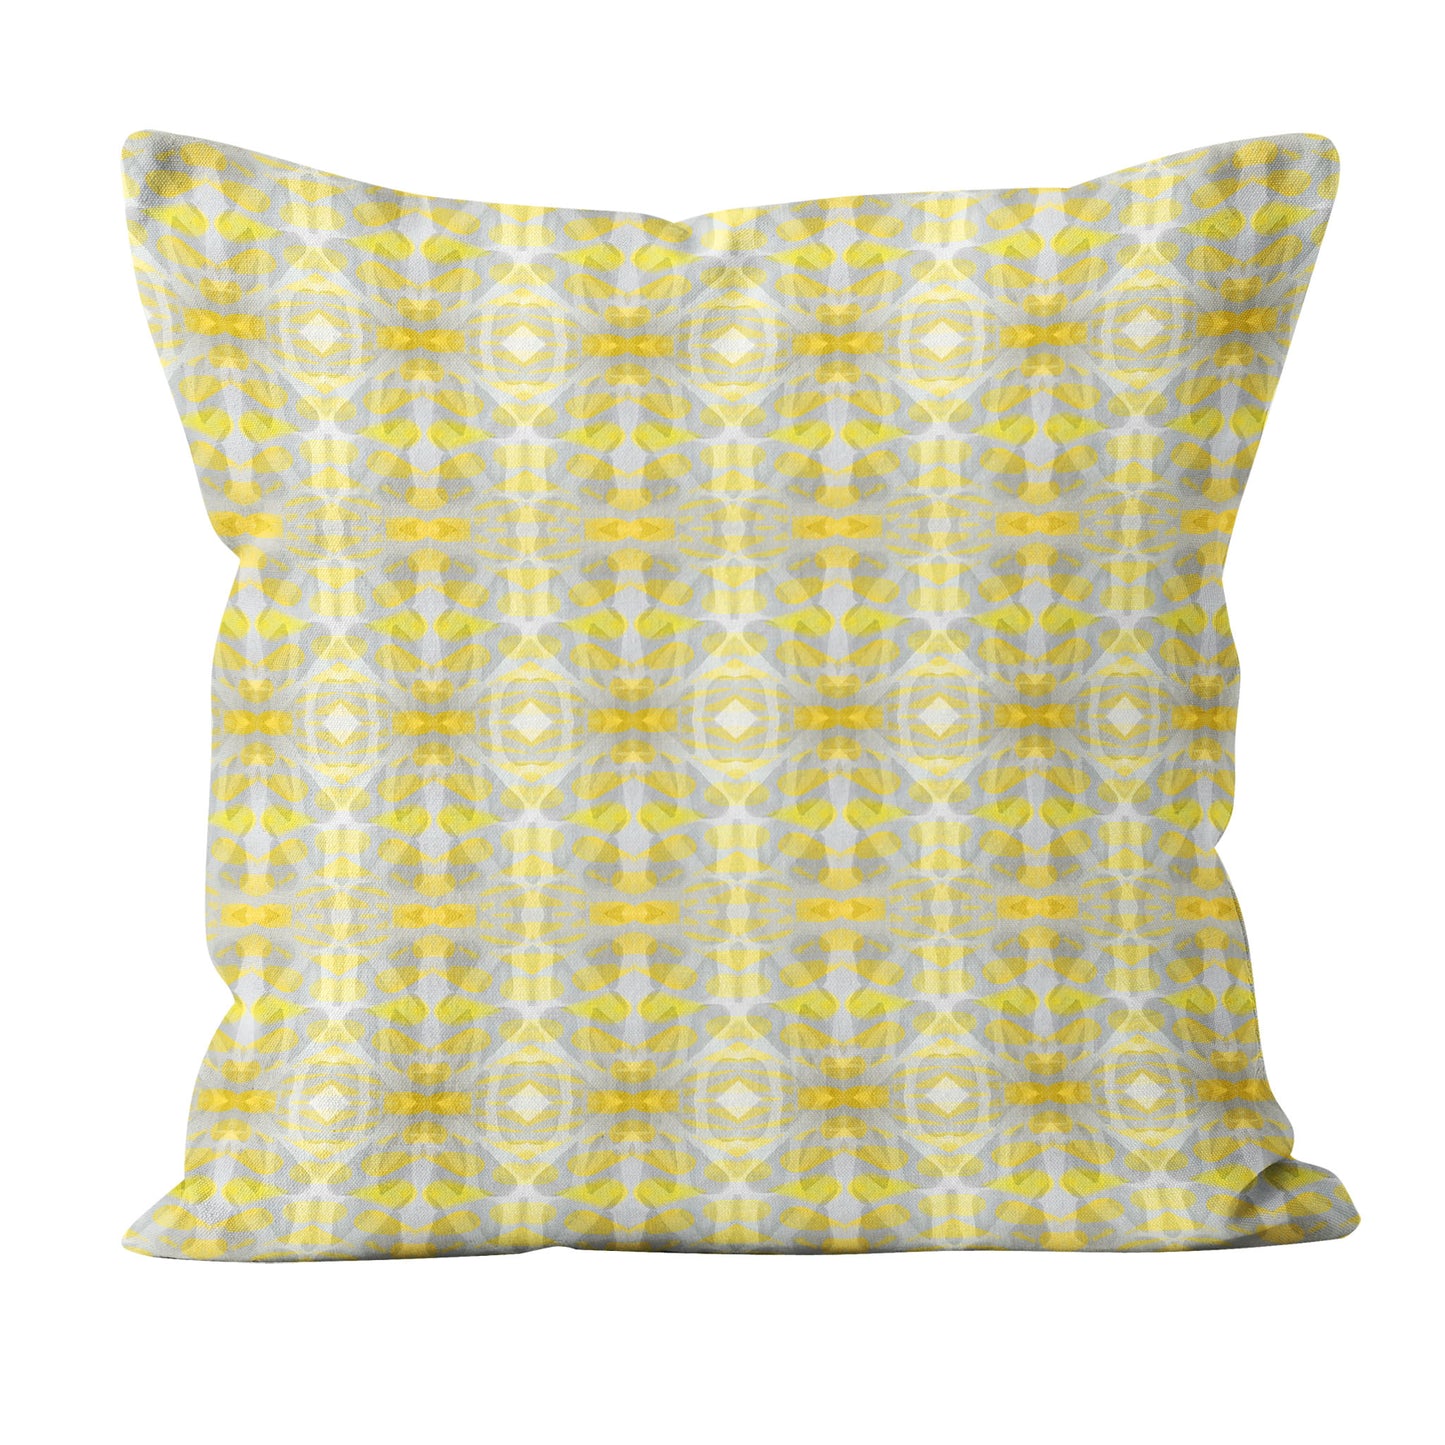 Square throw pillow featuring hand-painted yellow and grey pattern.